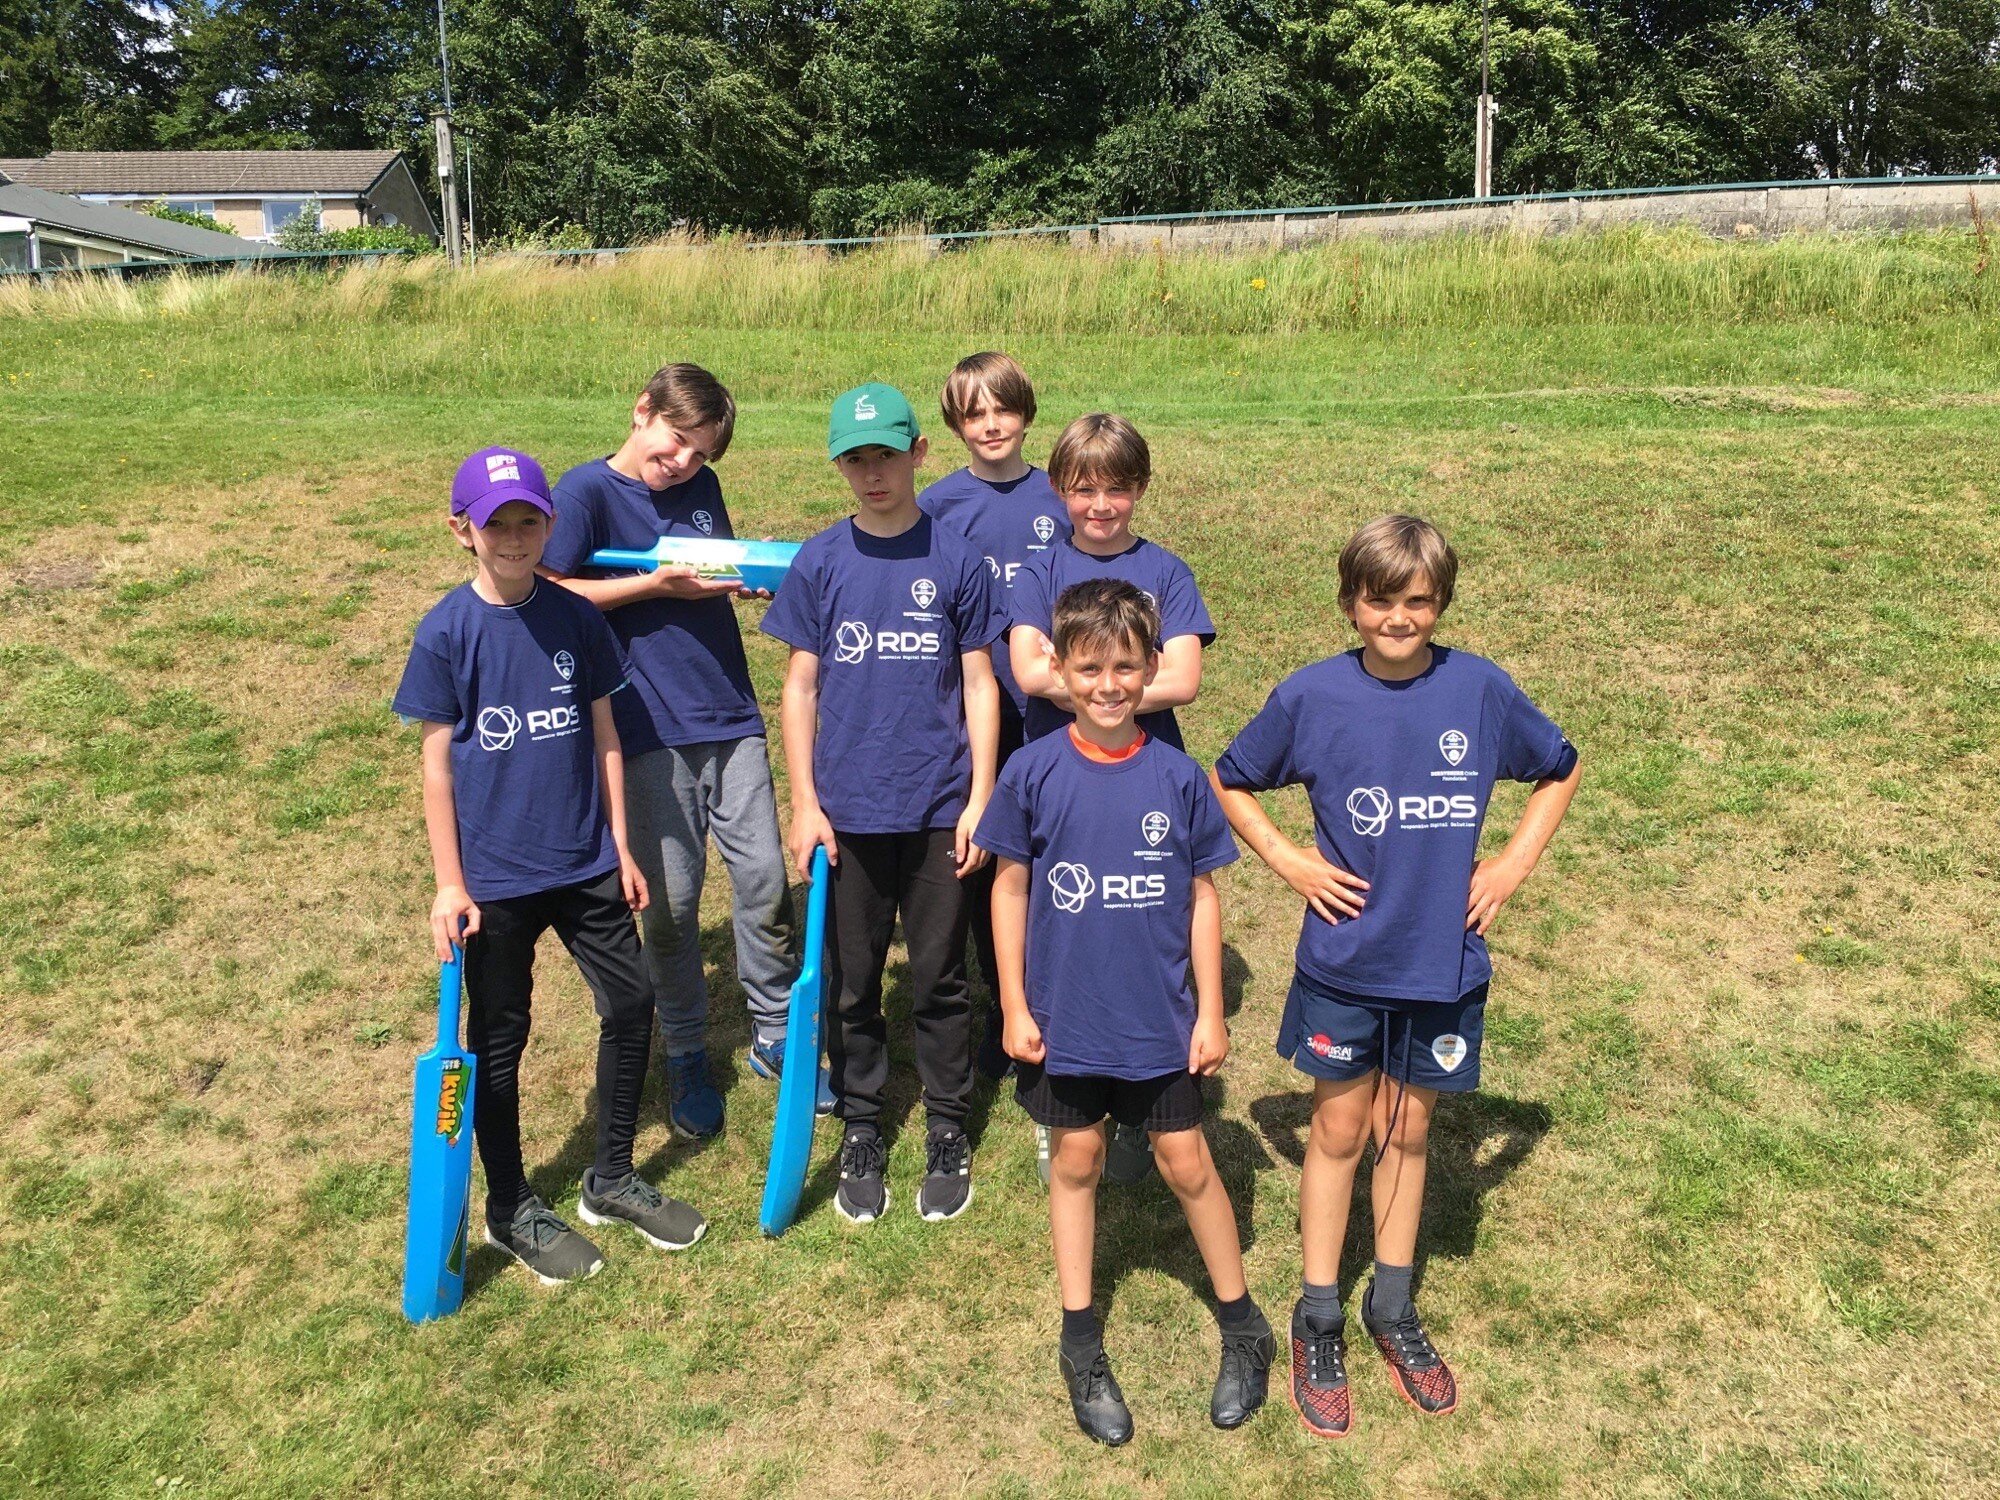 Foundation bowled over by IT firm’s support for summer camp